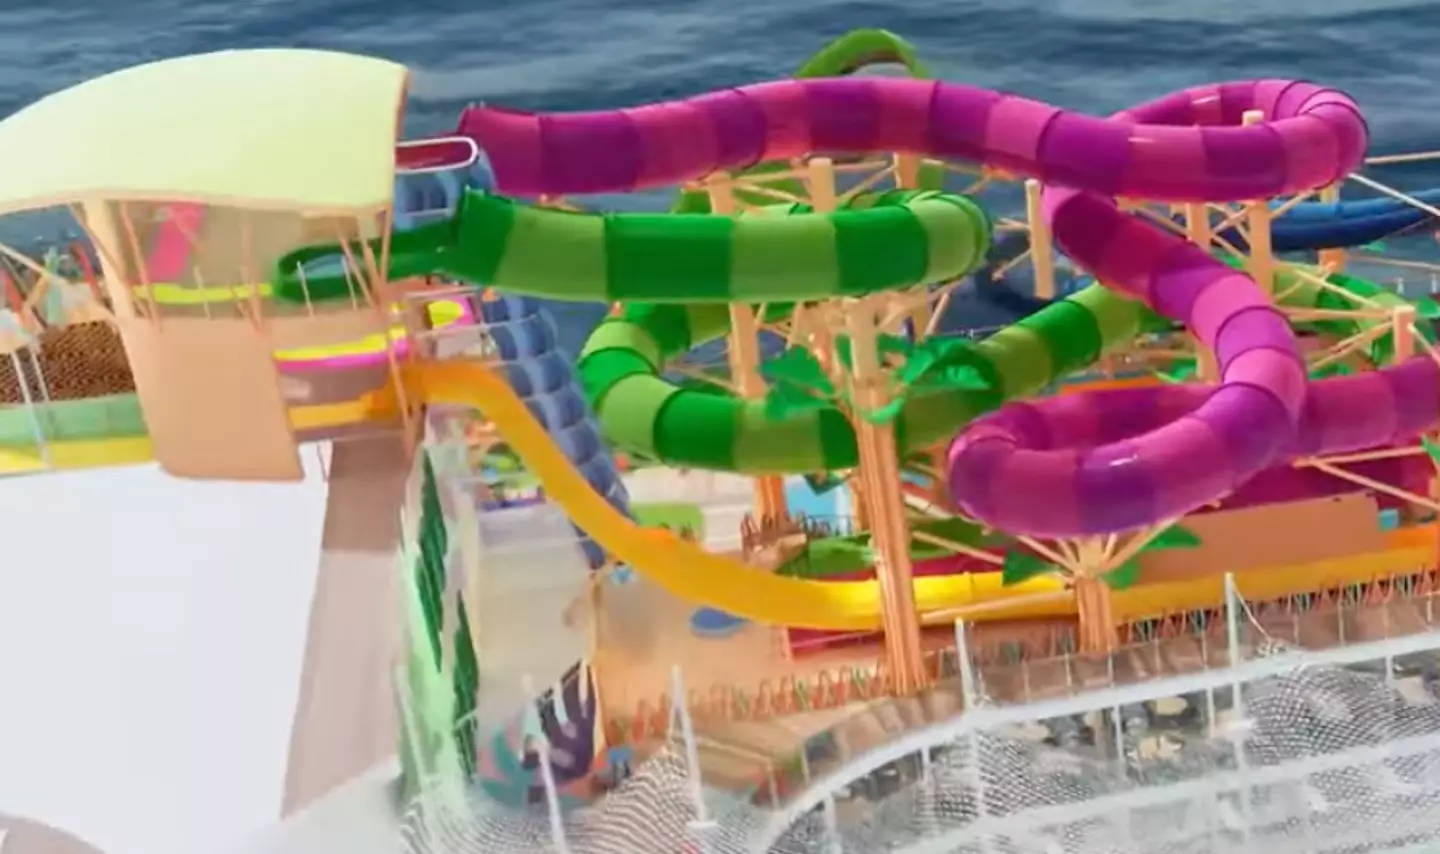 There's a total of six mega slides in the ship's waterpark.